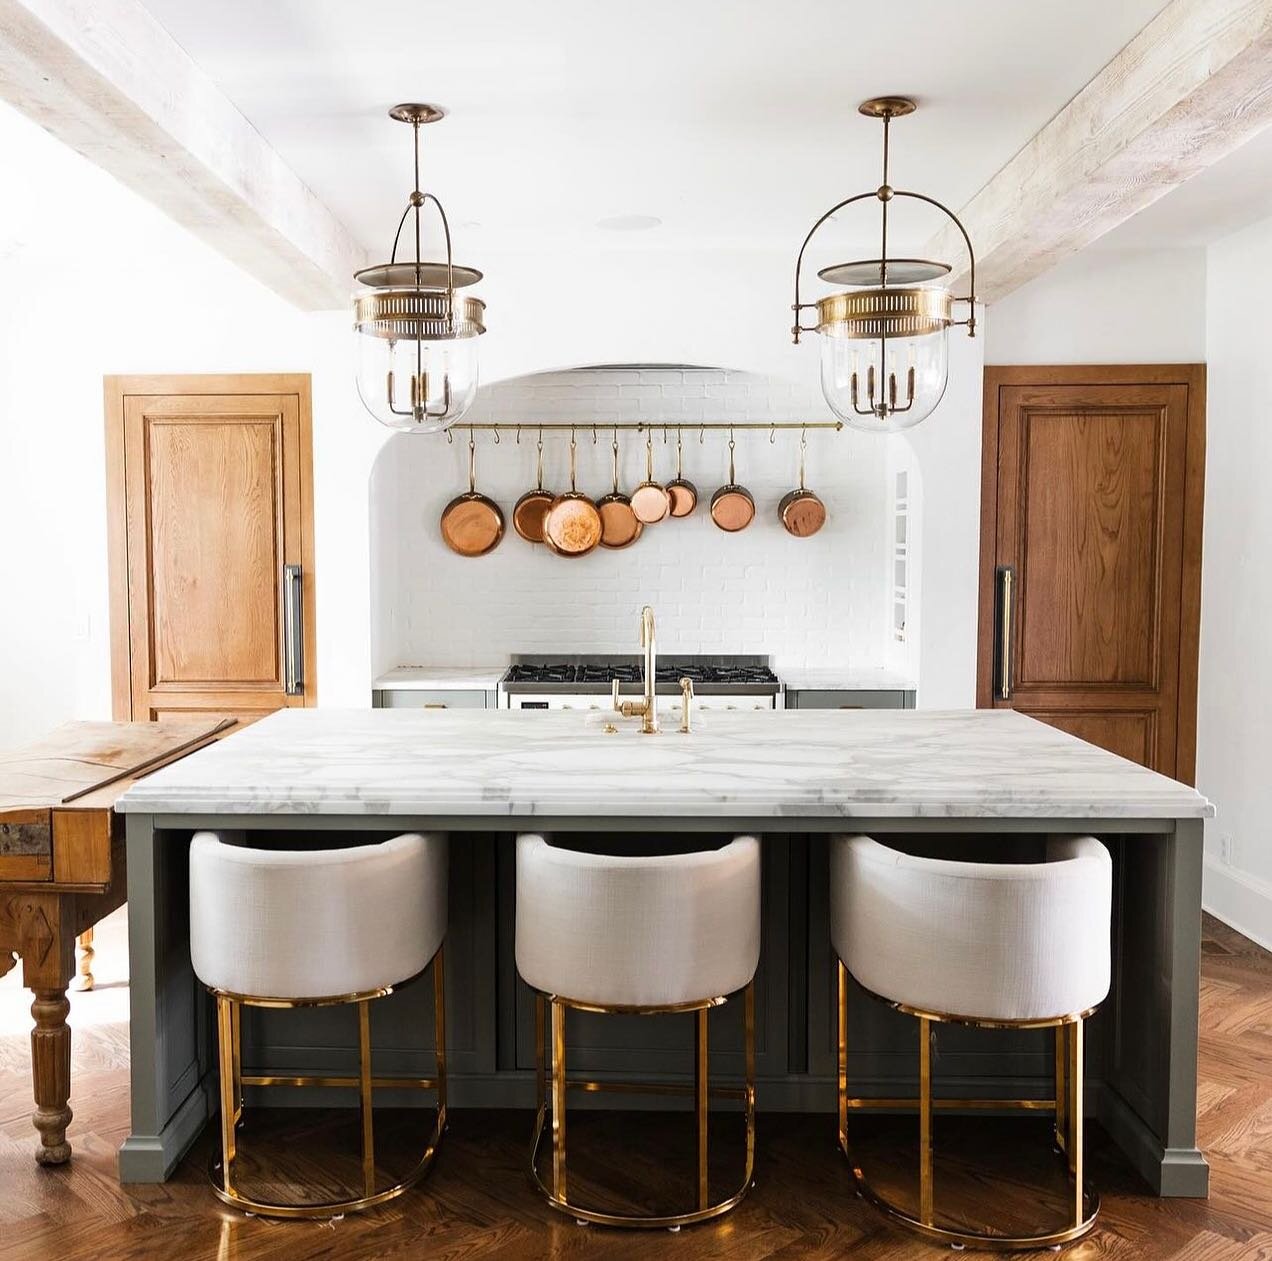 Our second project on this year&rsquo;s @atlantahomesmag Tour of Kitchens: a timelass Tuxedo Park manor 

This lovely kitchen will be featured on the tour Sunday March 17th from 11AM-4PM

Tickets on sale at @atlantatourofkitchens 

Designer: @studioe